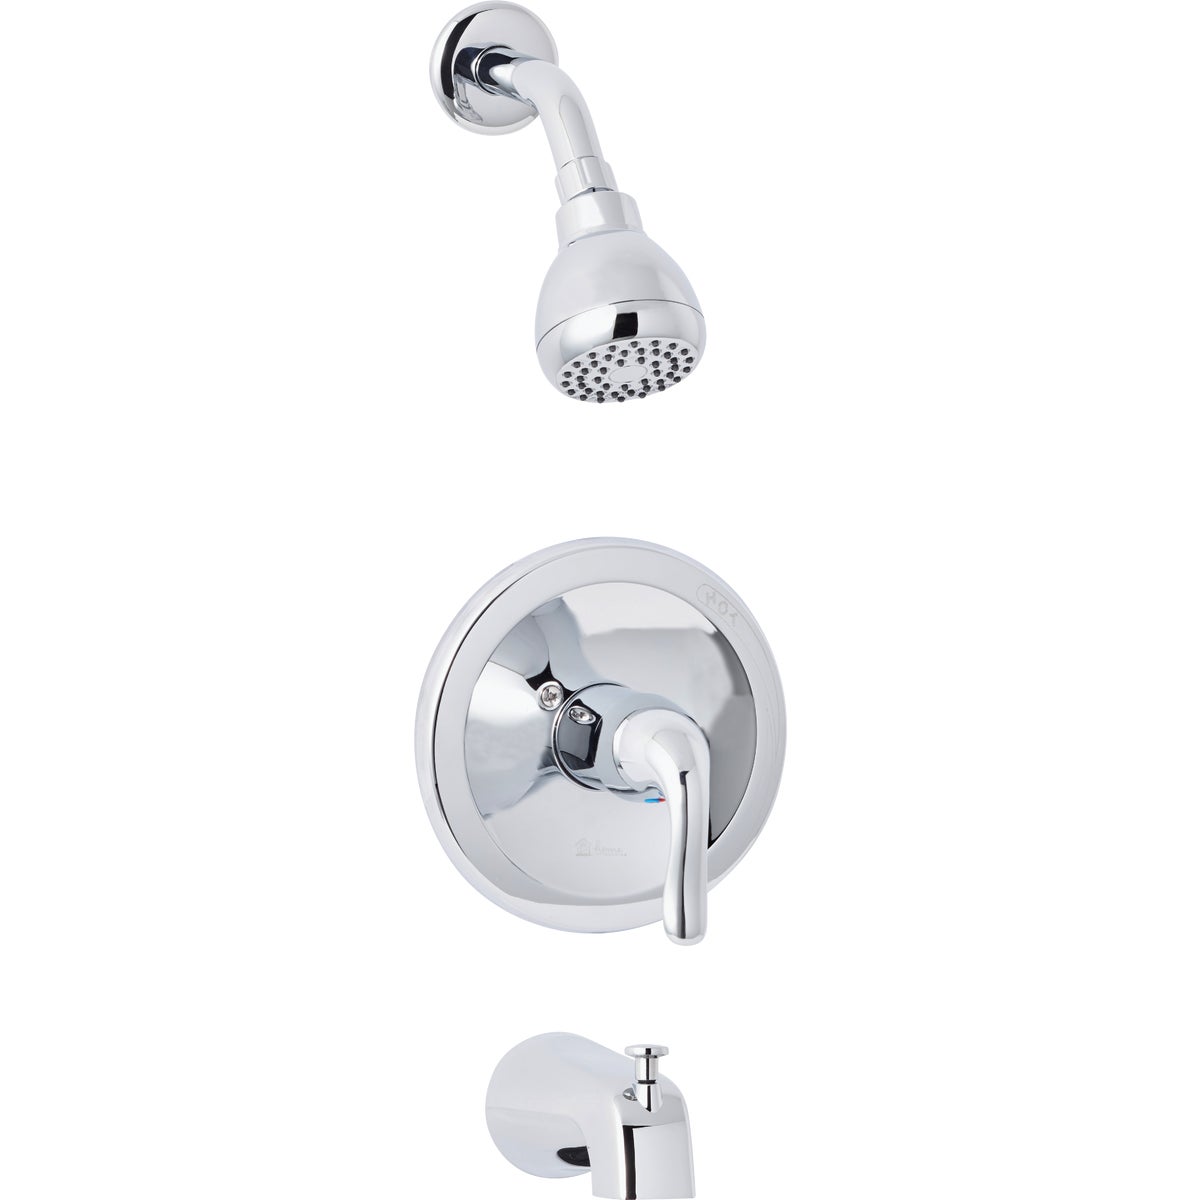 Item 404243, Single metal handle tub and shower faucet. 1.